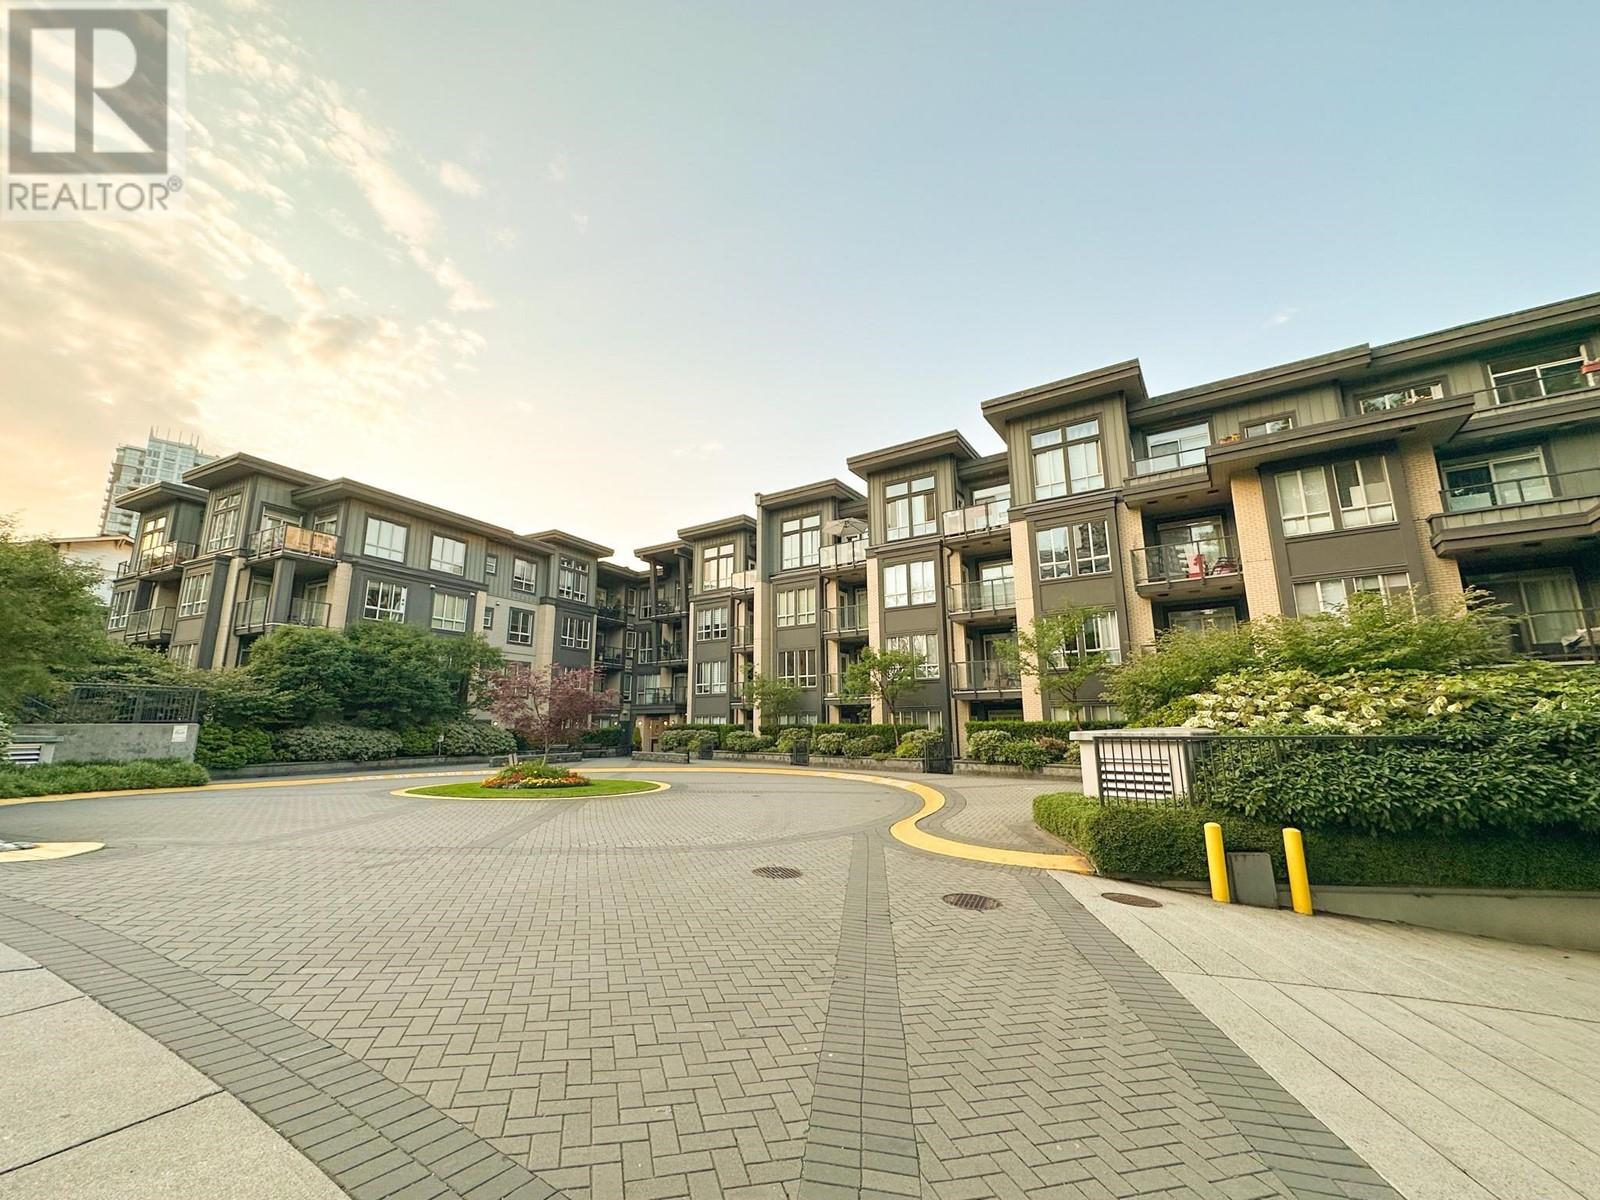 301 225 FRANCIS WAY, new westminster, British Columbia V3L0G1